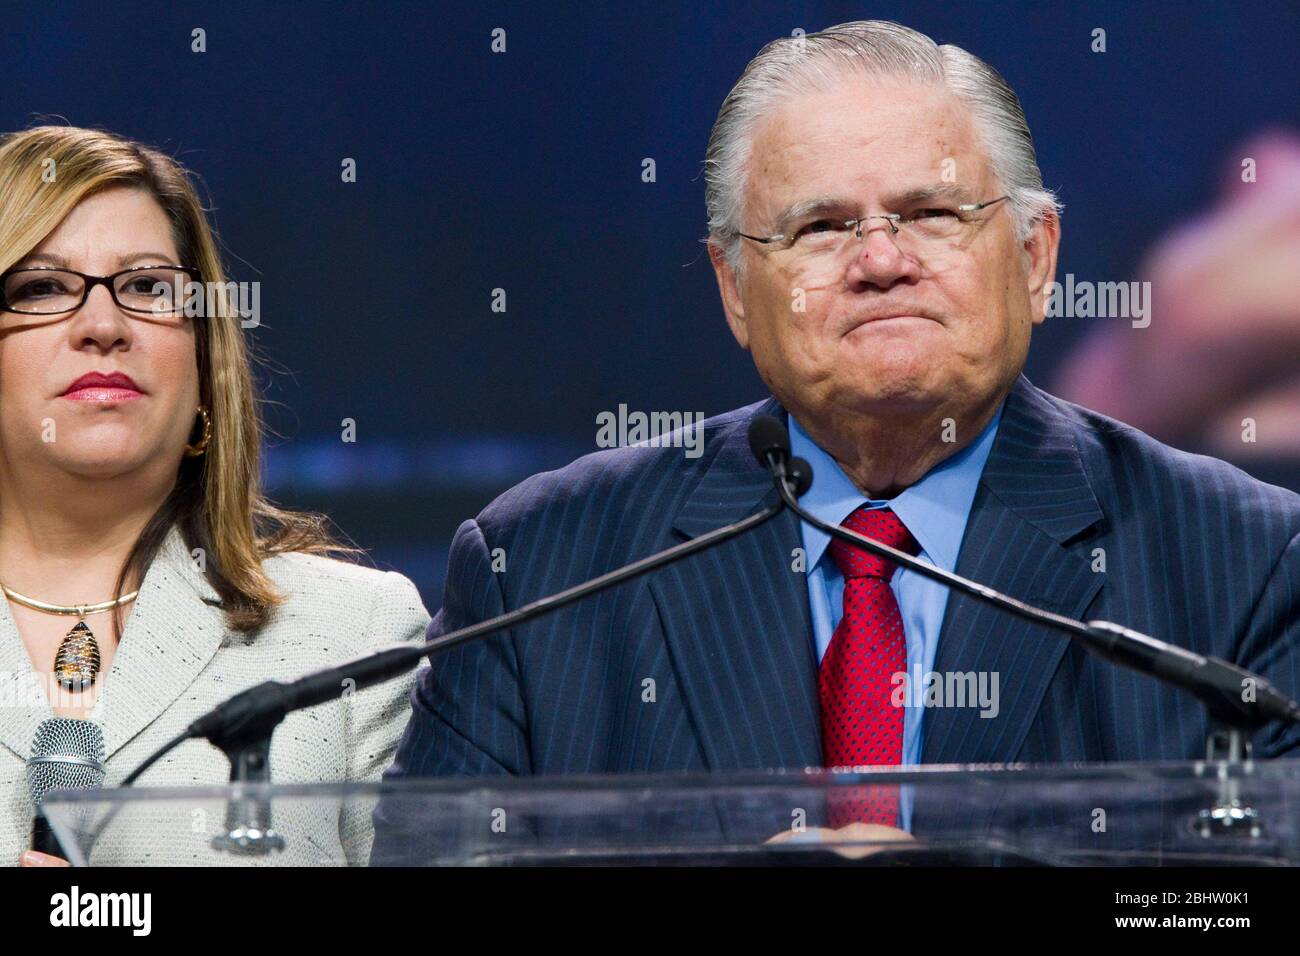 Houston, Texas USA, August 6, 2011: Controversial pastor John Hagee Sr. of Cornerstone Church in San Antonio speaks at The Response, a day-long 'call to prayer for a nation in crisis' that attracted over 30,000 worshippers to hear prayers, gospel music and conservative evangelic speakers at Reliant Stadium.   ©Bob Daemmrich Stock Photo